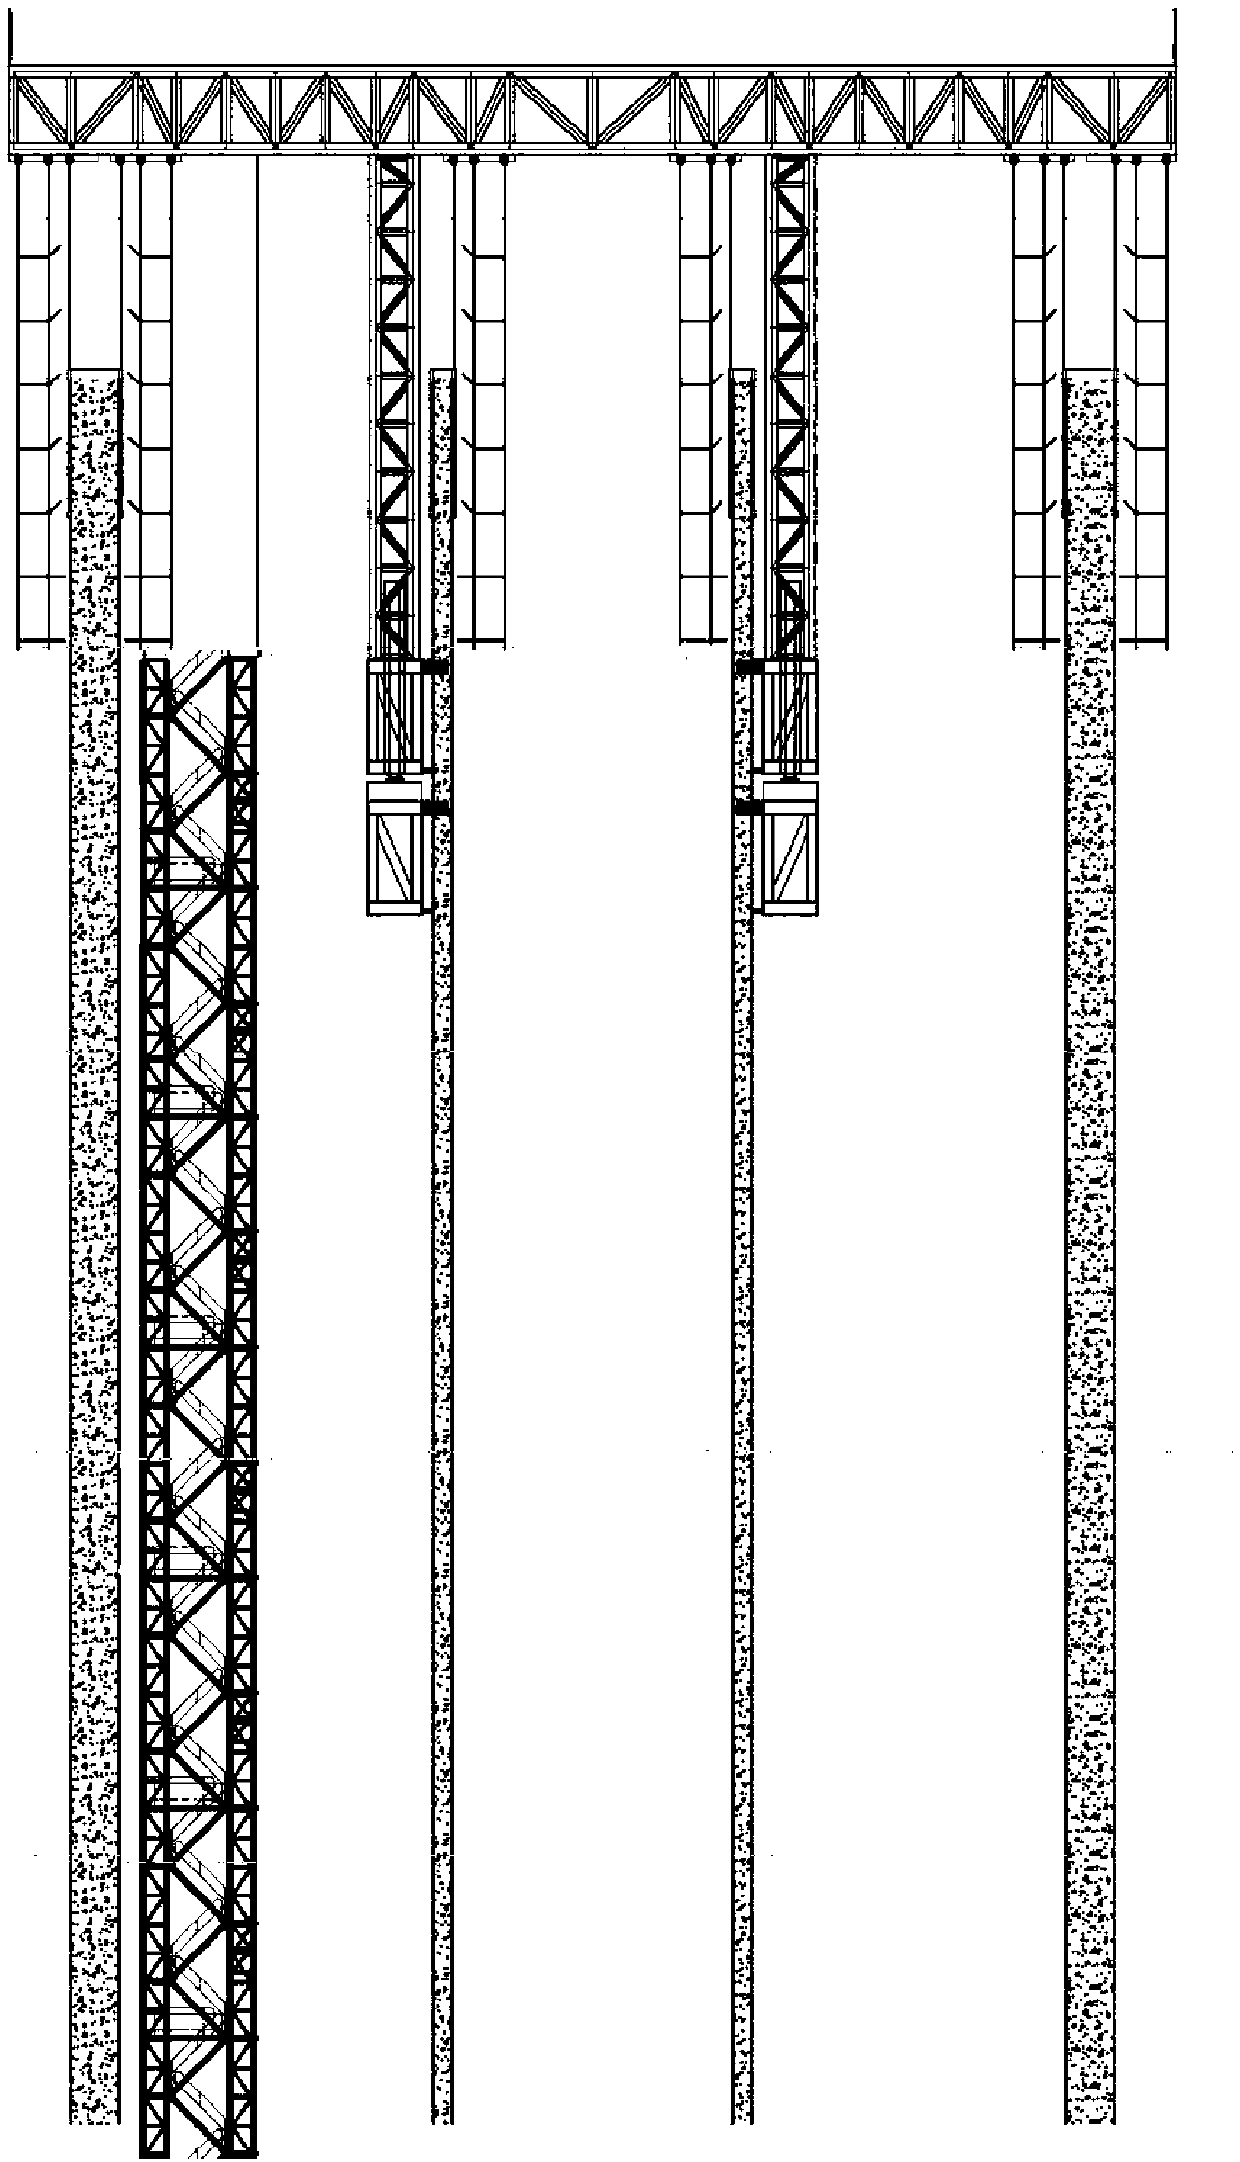 A simultaneous construction method for horizontal and vertical structures of super high-rise buildings